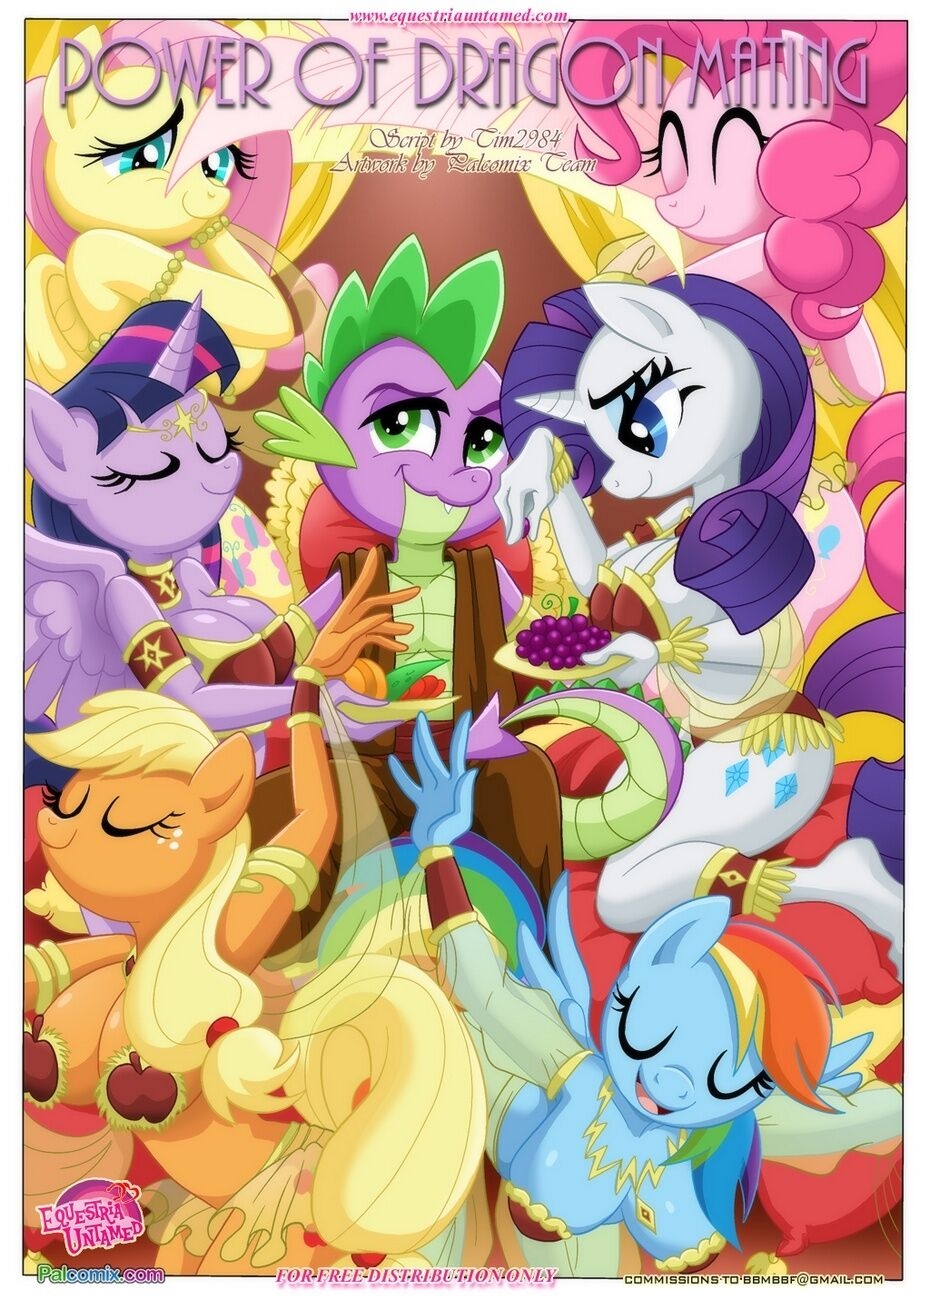 [Palcomix] The Power Of Dragon Mating (My Little Pony Friendship Is Magic) (italian) 0